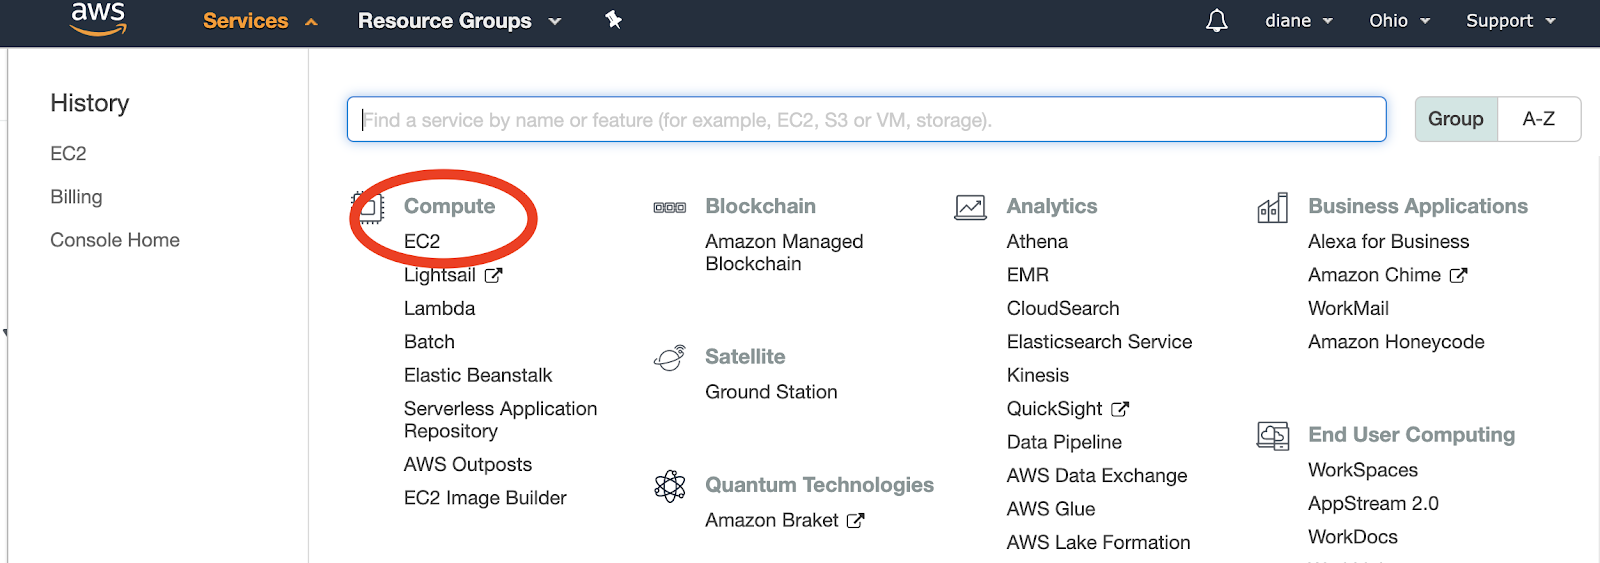 EC2 option on AWS Services dashboard